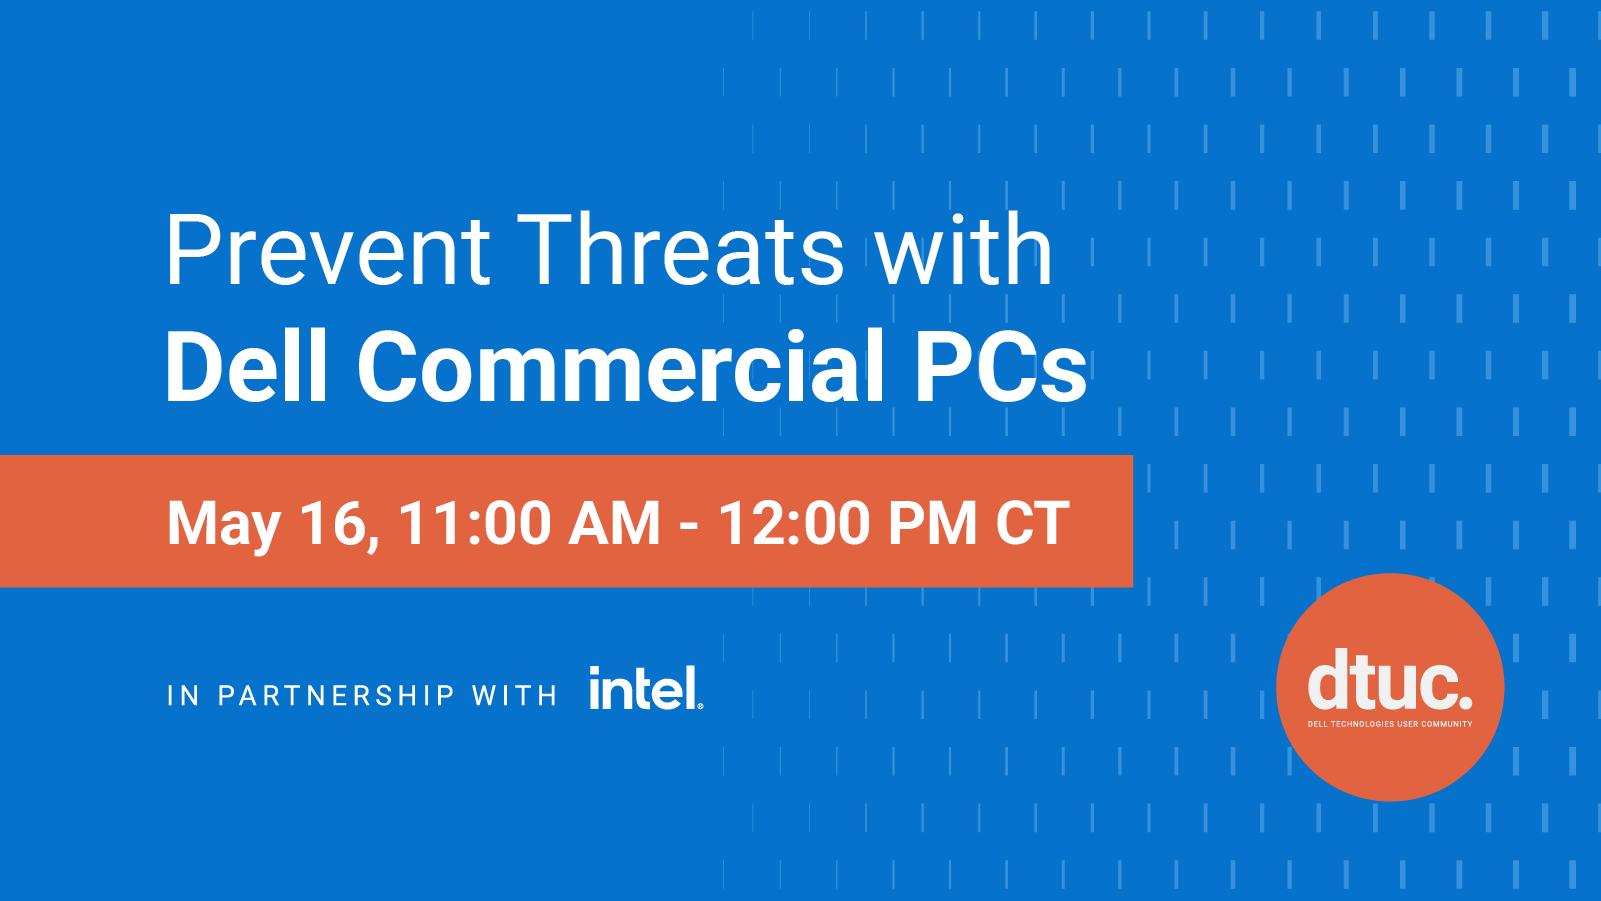 Prevent threats with Dell commercial PCs